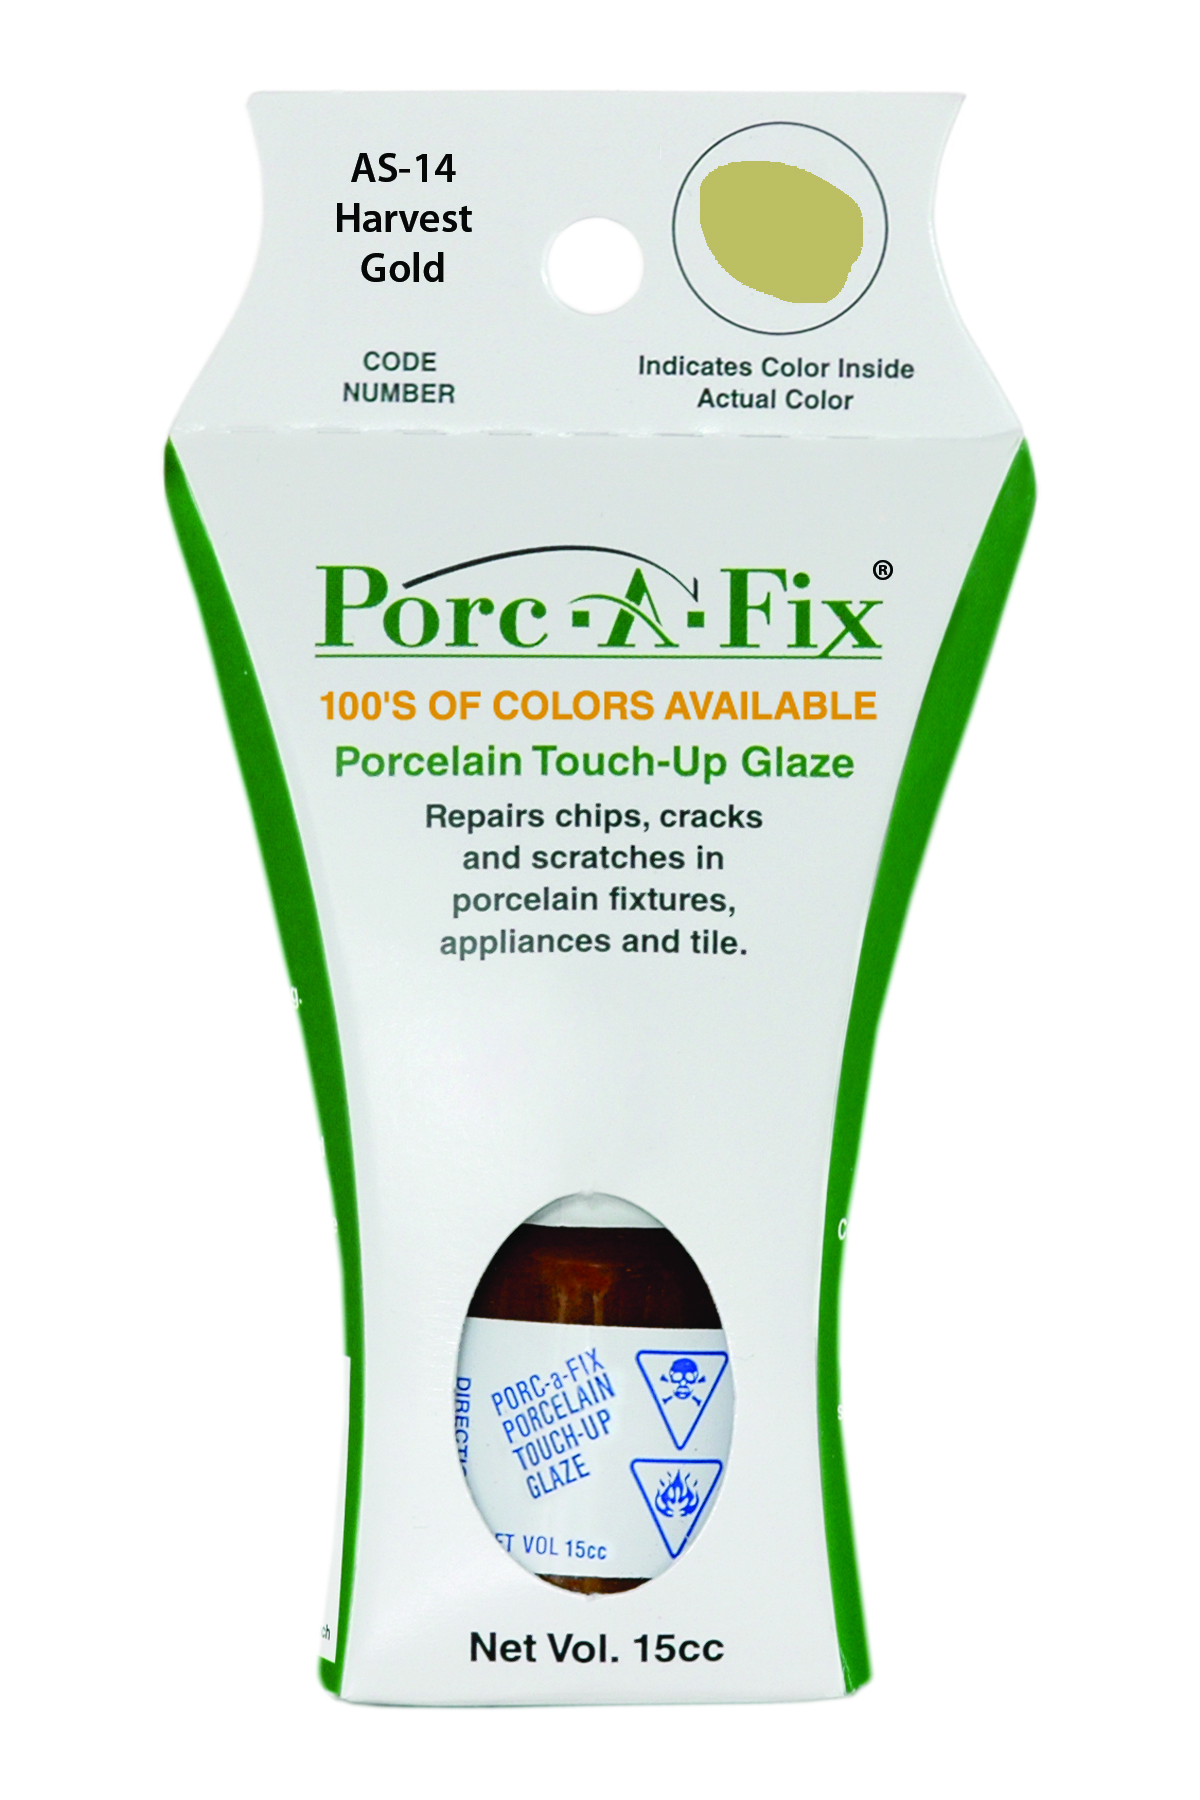 Fixture-Fix | AS-14 | Porc-A-Fix Touch-Up Glaze American Standard Harvest Gold - Compatible with American Standard 070900-0220A Touch Up Paint Kit - HARVEST GOLD